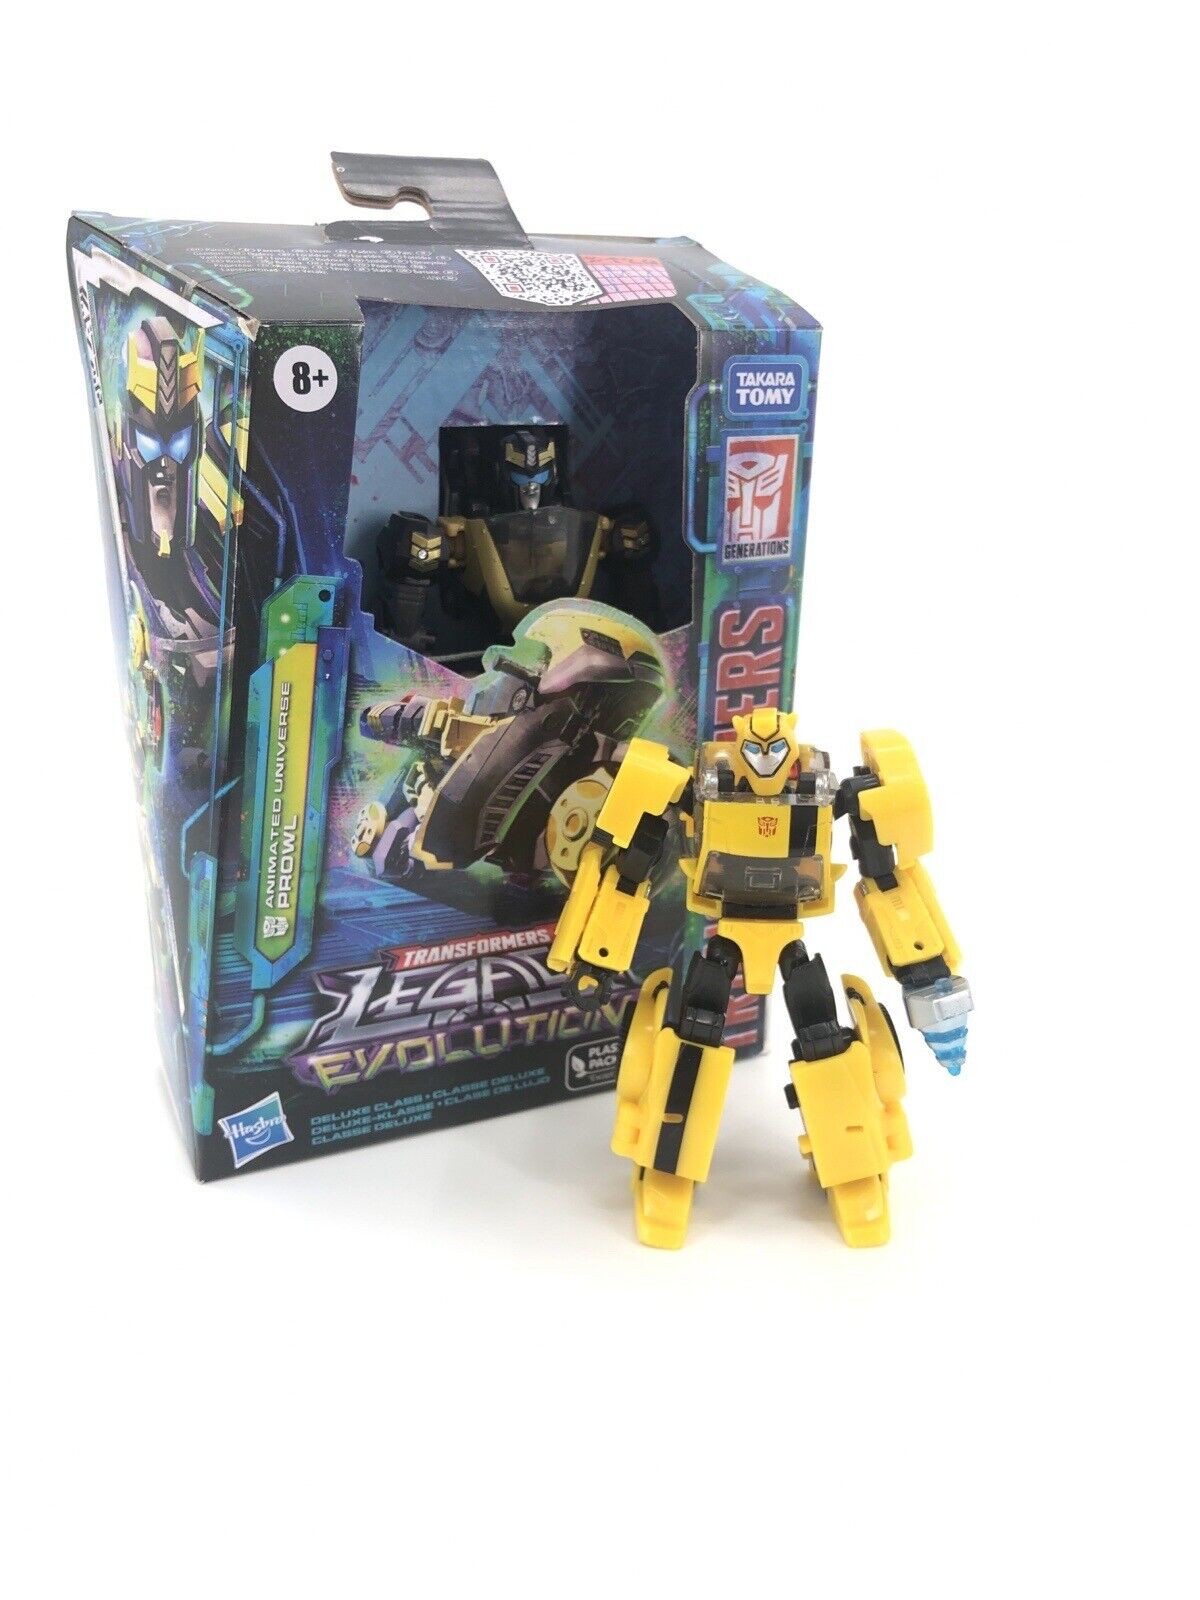 Transformers News: Legacy Deluxe Animated Bumblebee images found